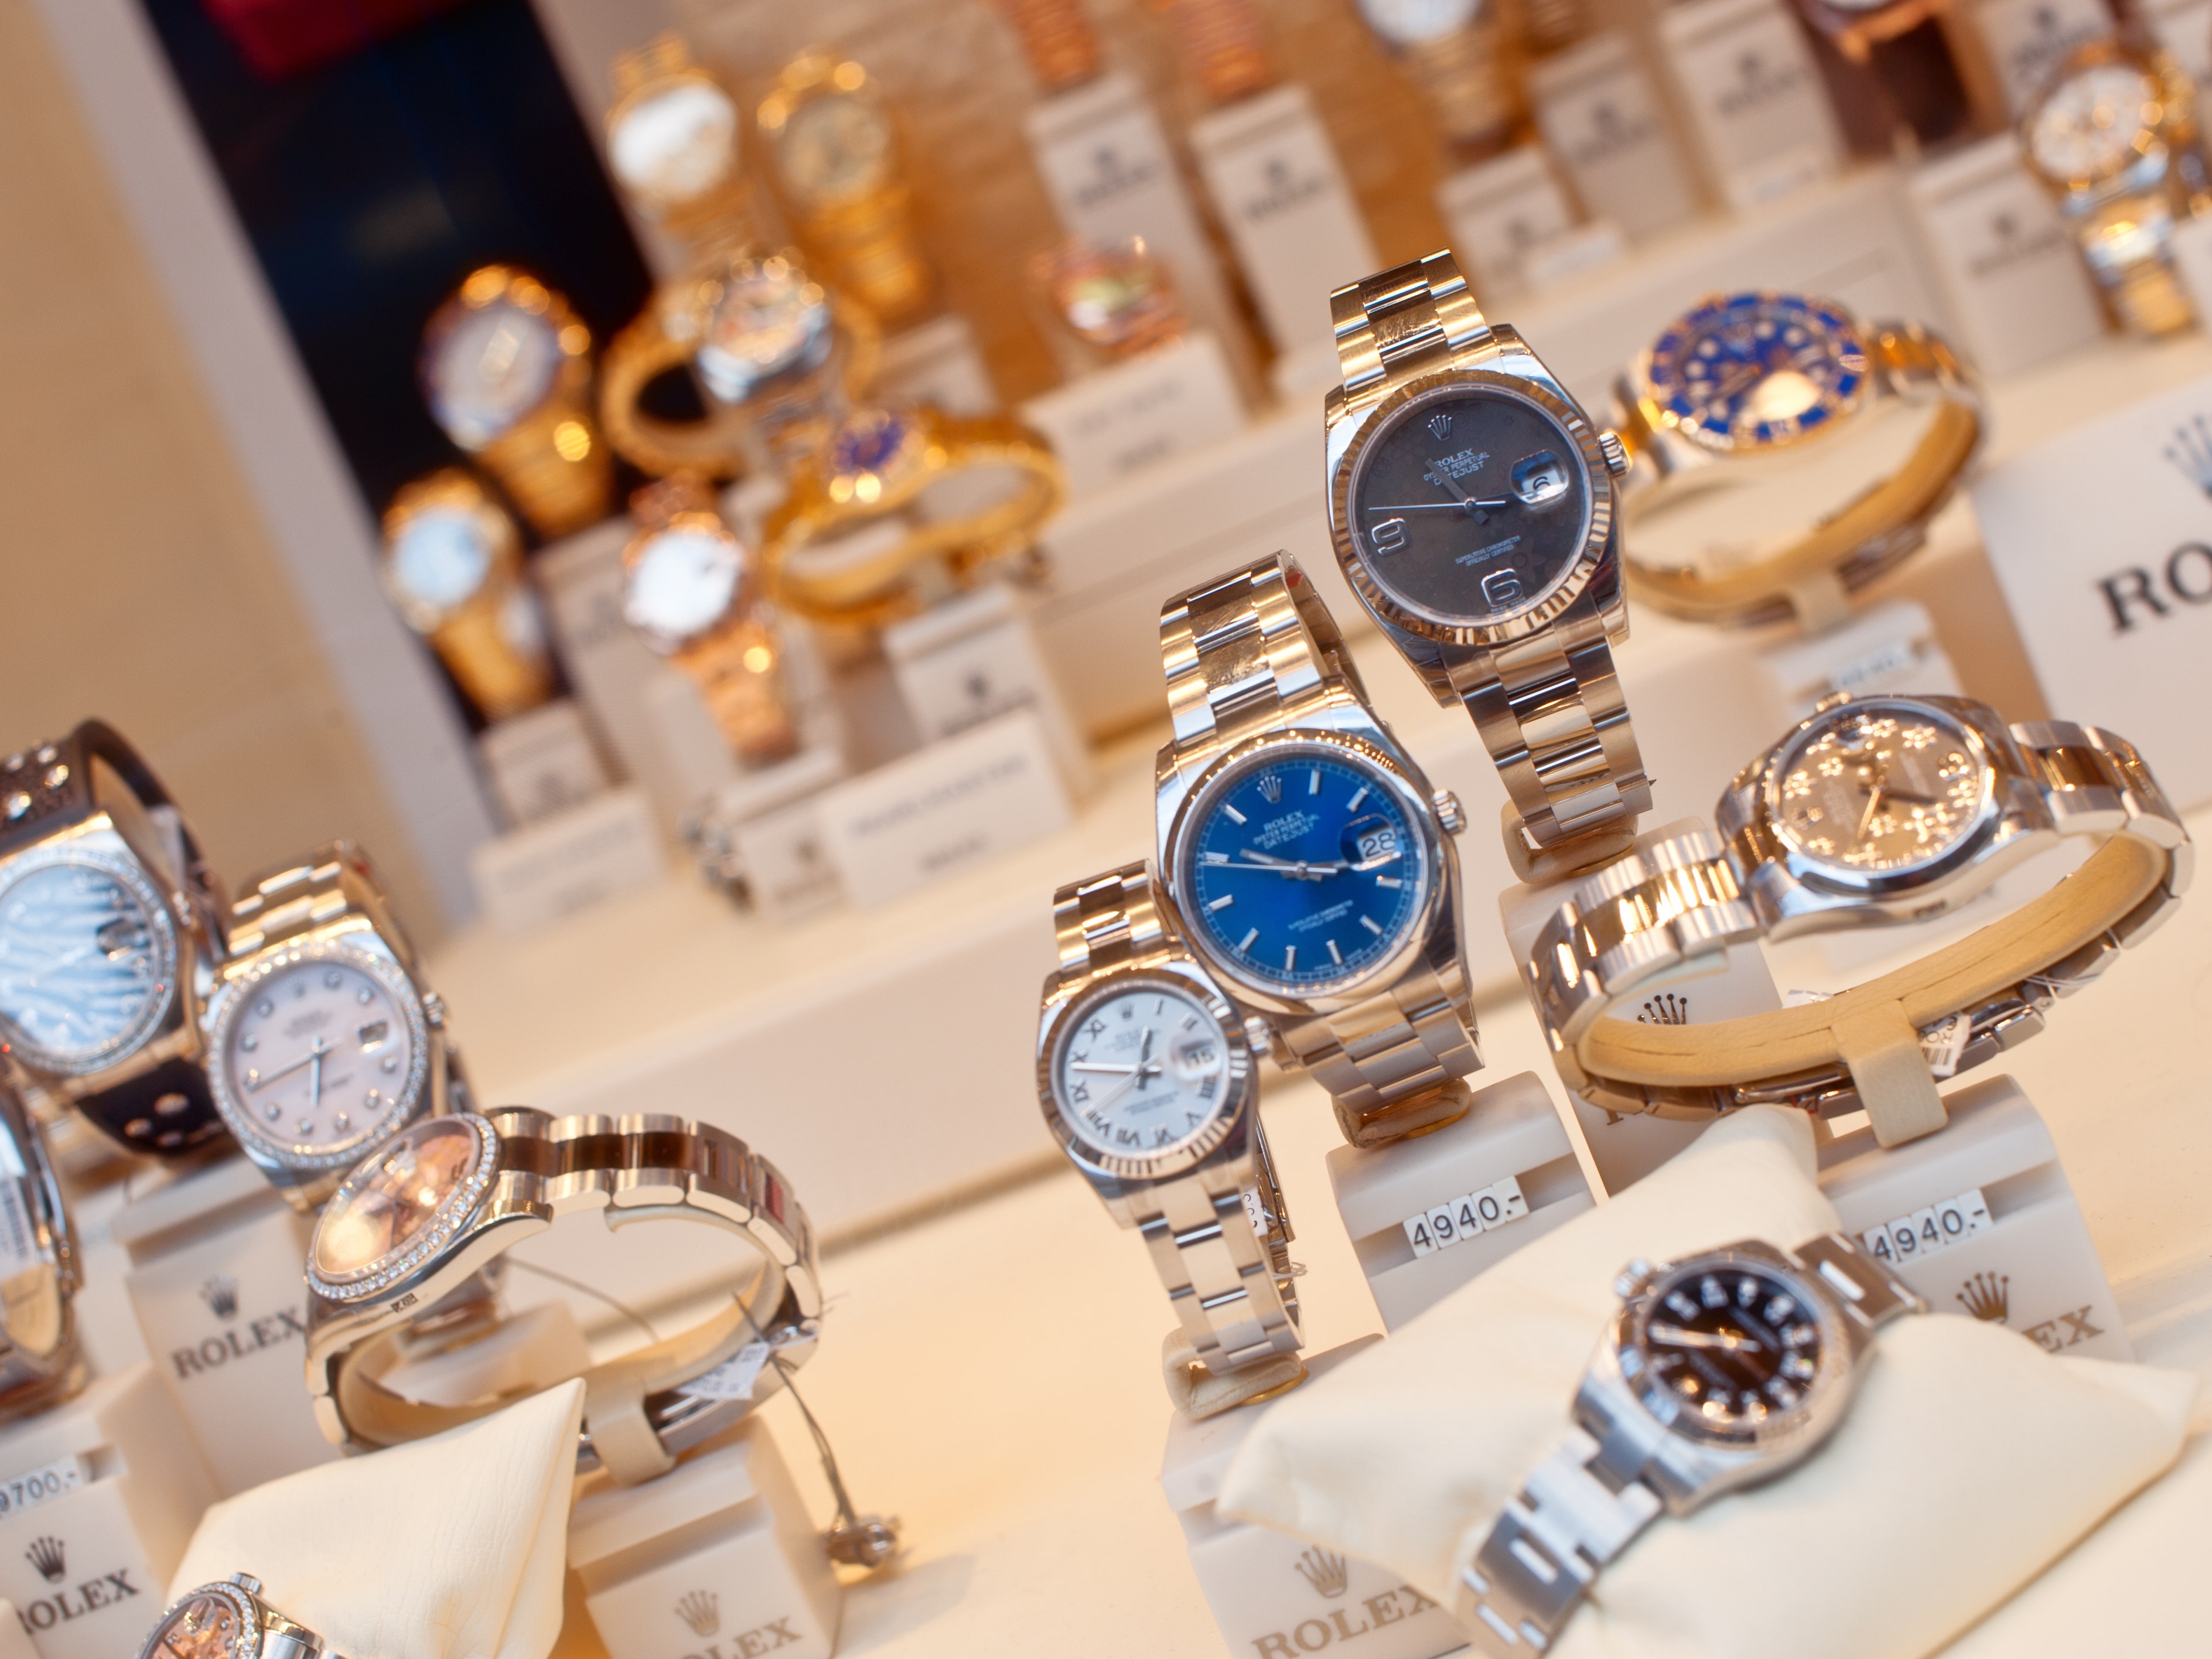 LVMH's watches and jewelry revenue in the past year [8]